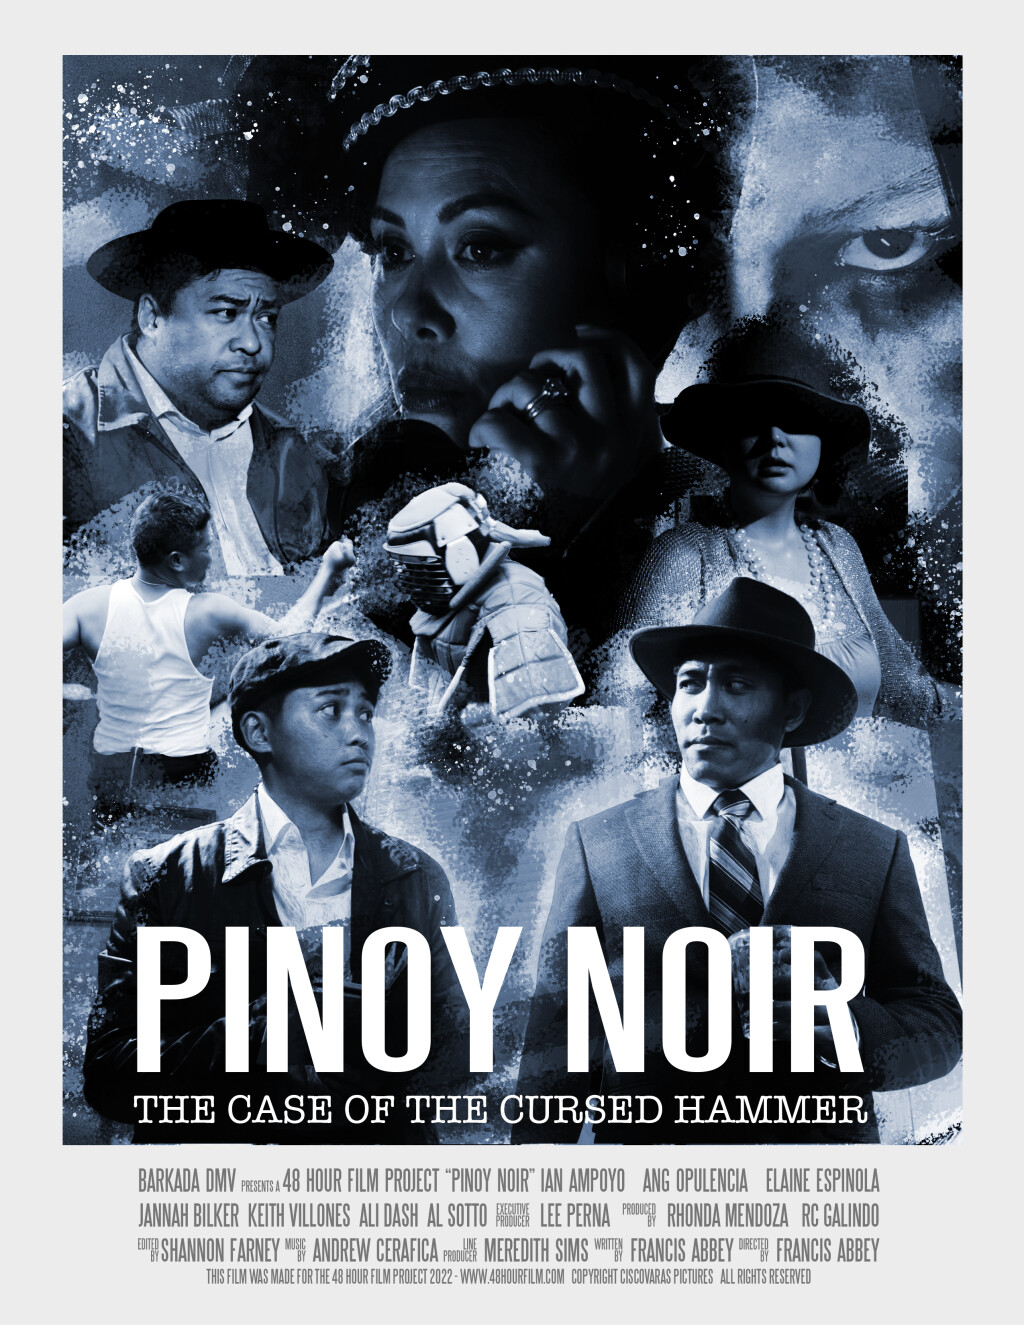 Filmposter for Pinoy Noir - The Case of the Cursed Hammer